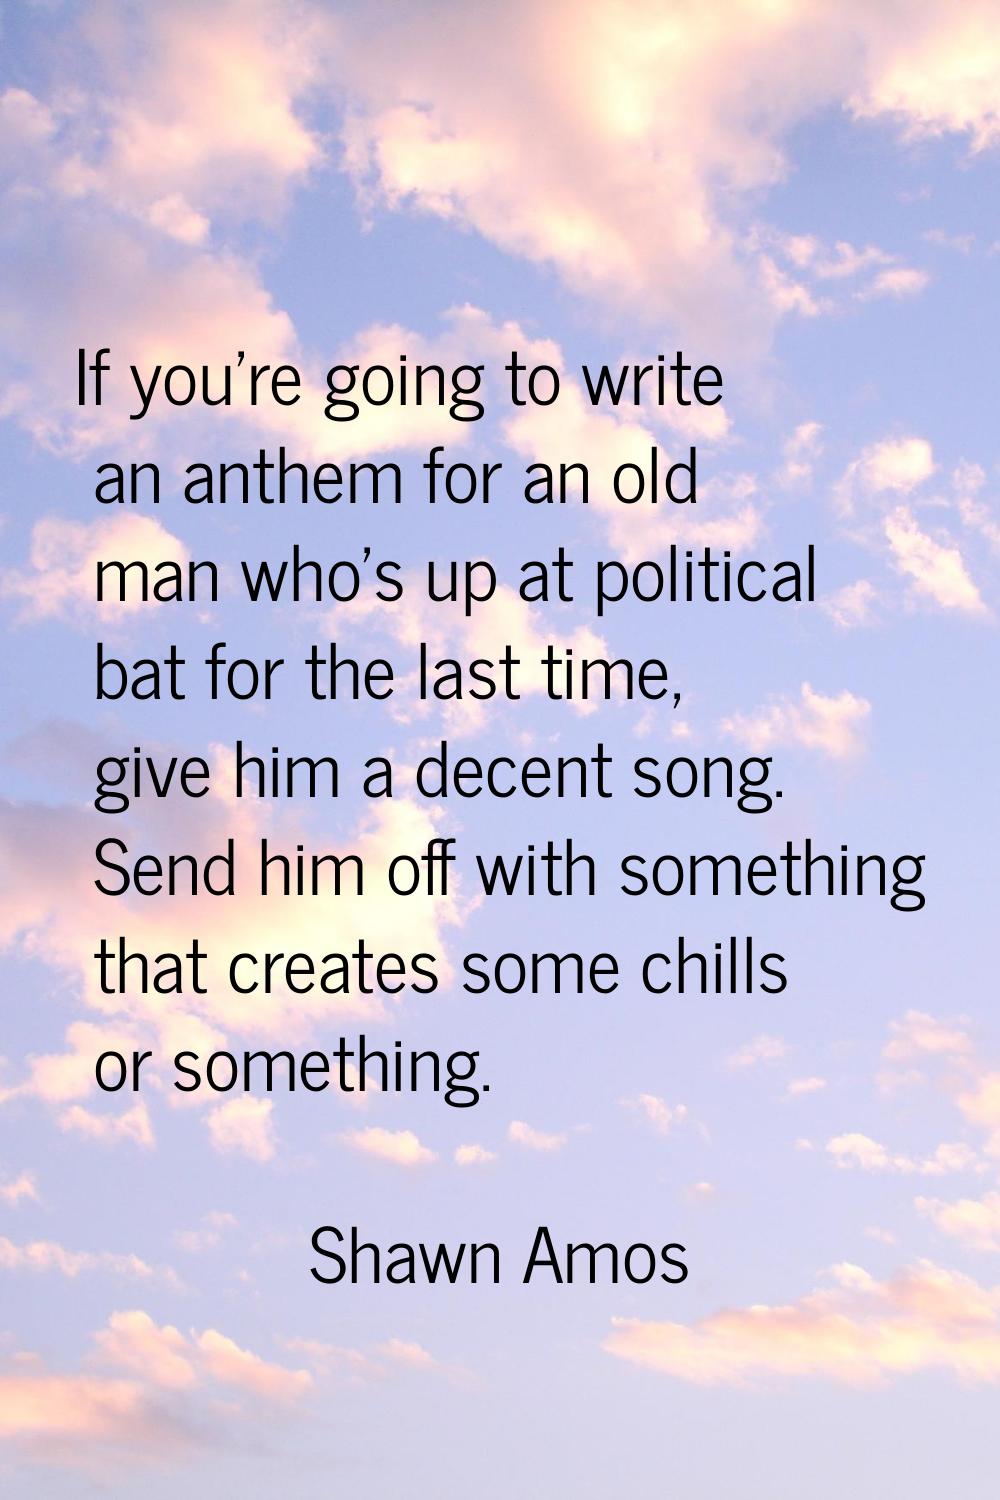 If you're going to write an anthem for an old man who's up at political bat for the last time, give